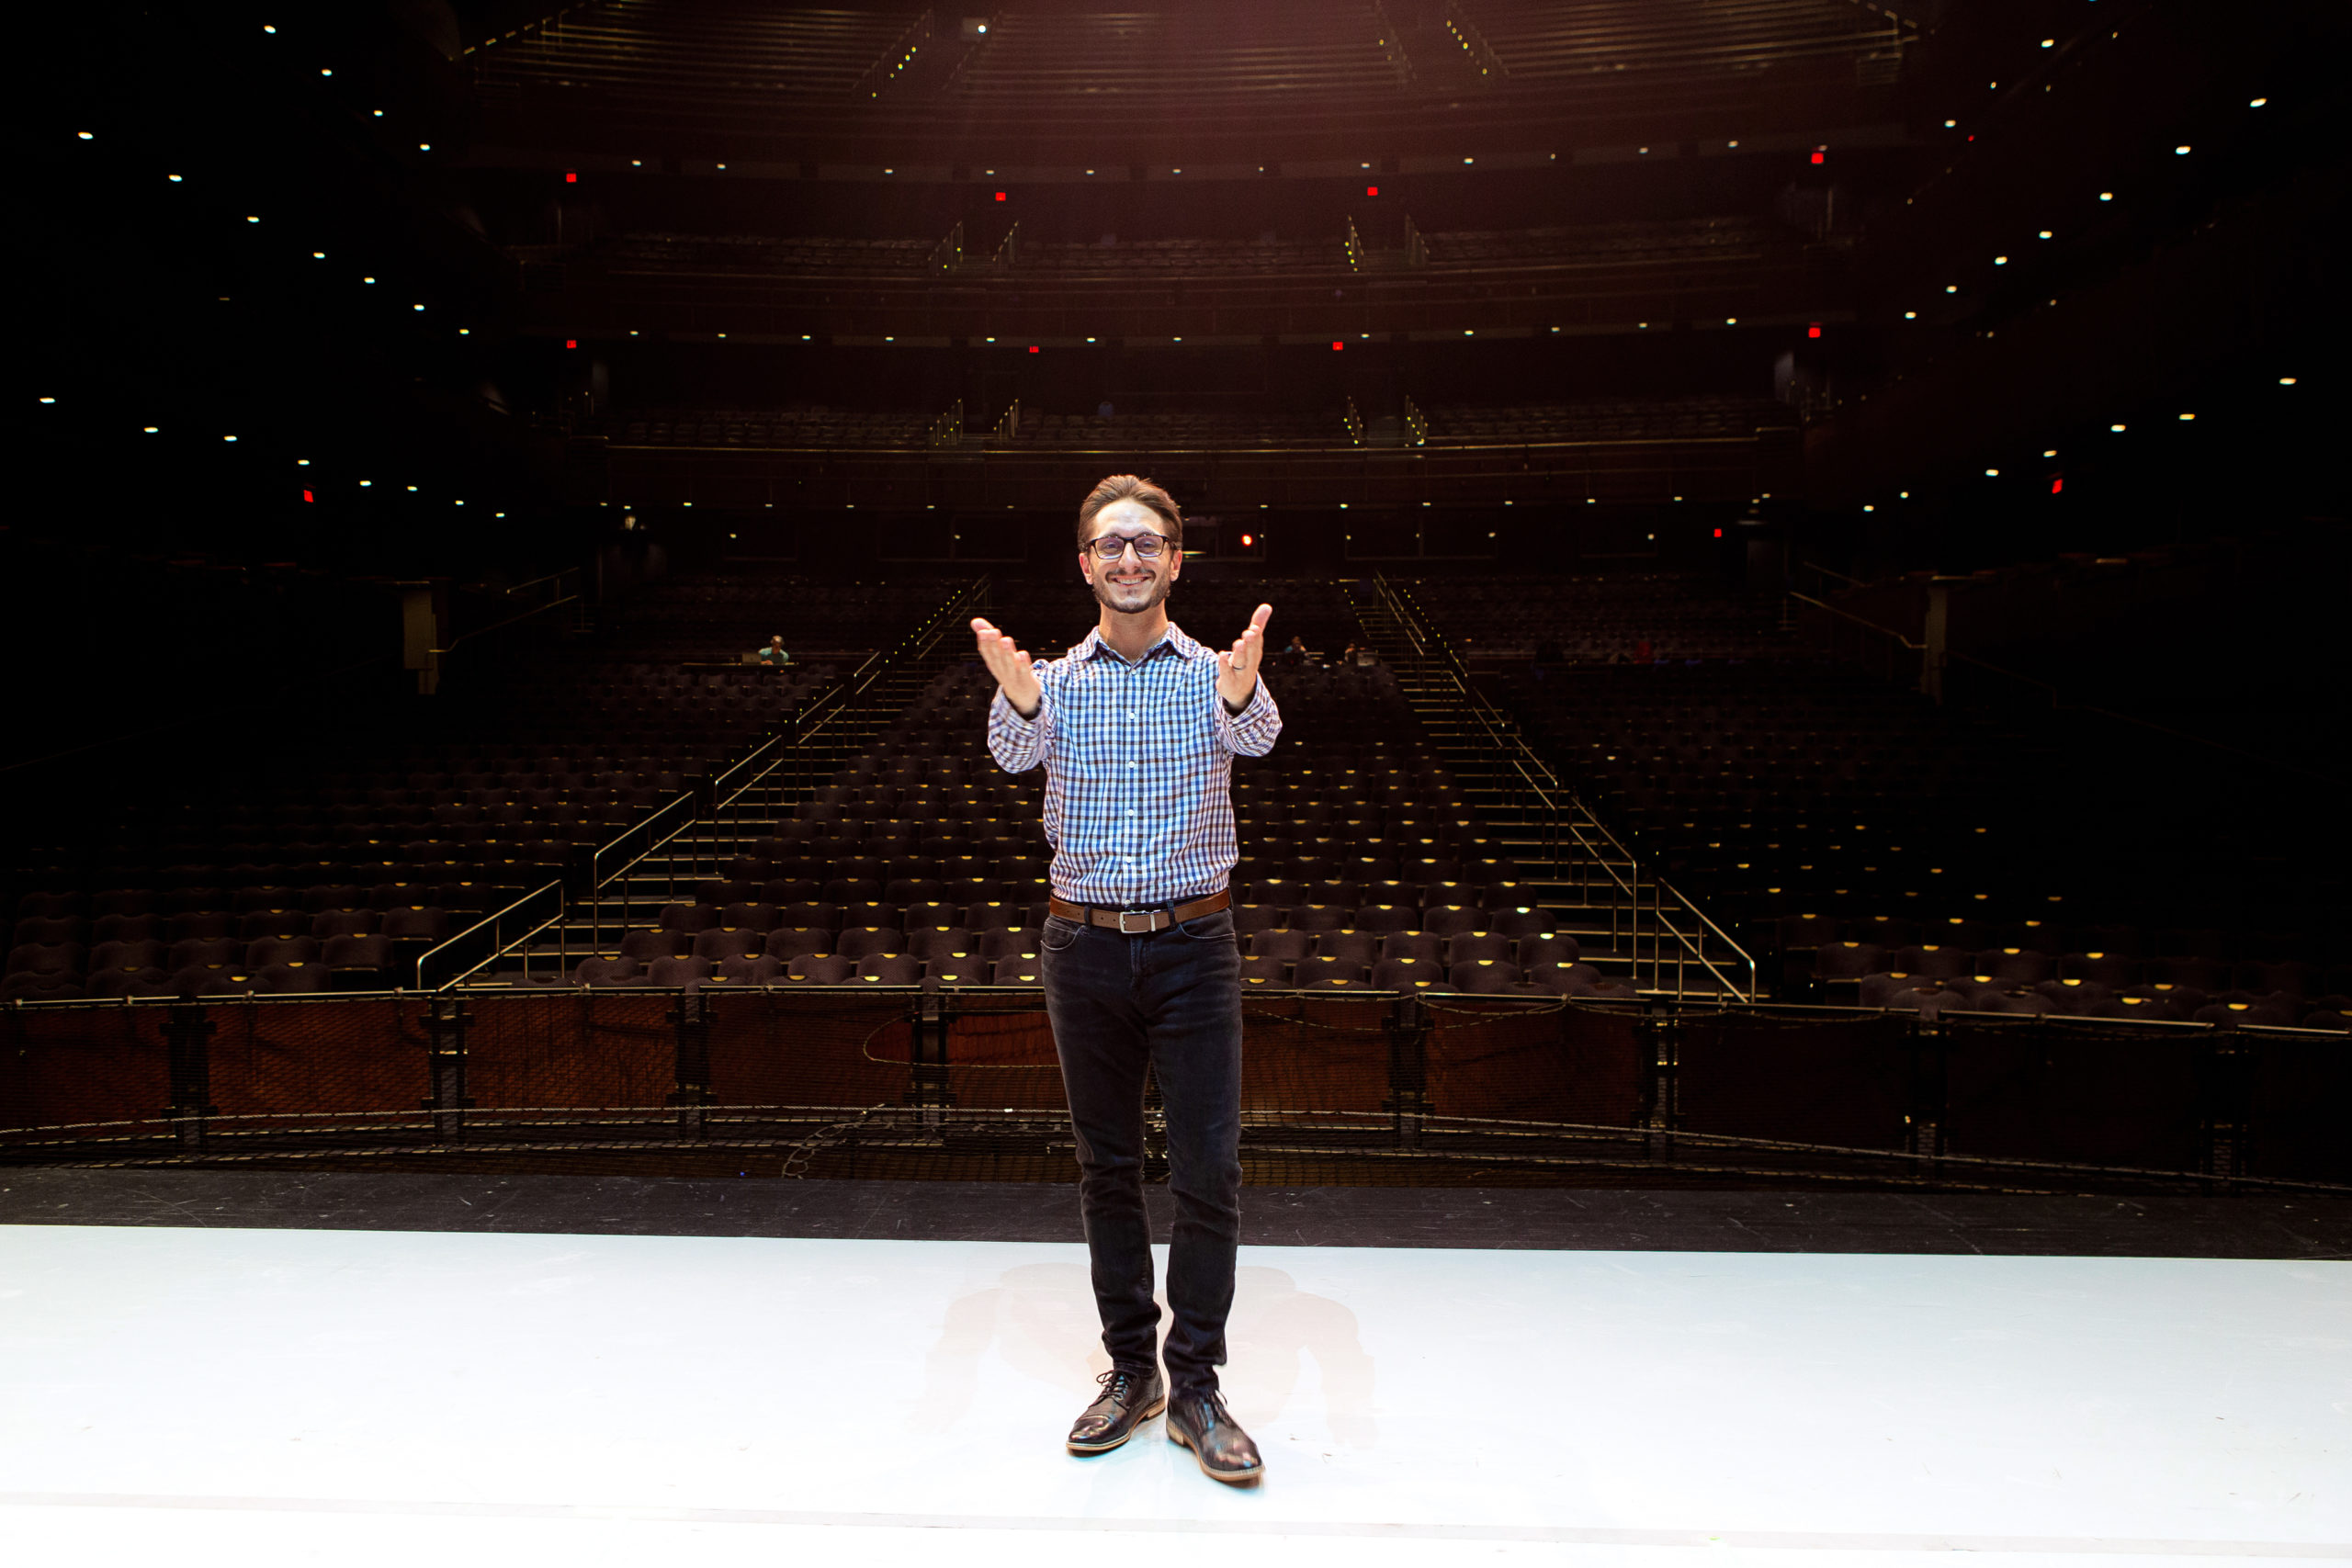 A man in black pants, dress shoes, glasses and a light blue button down shirt stands at the front of the stage, facing away from the audience and toward the camera. He smiles brightly, arms lifted front with his hands open in a motion of gratitude.